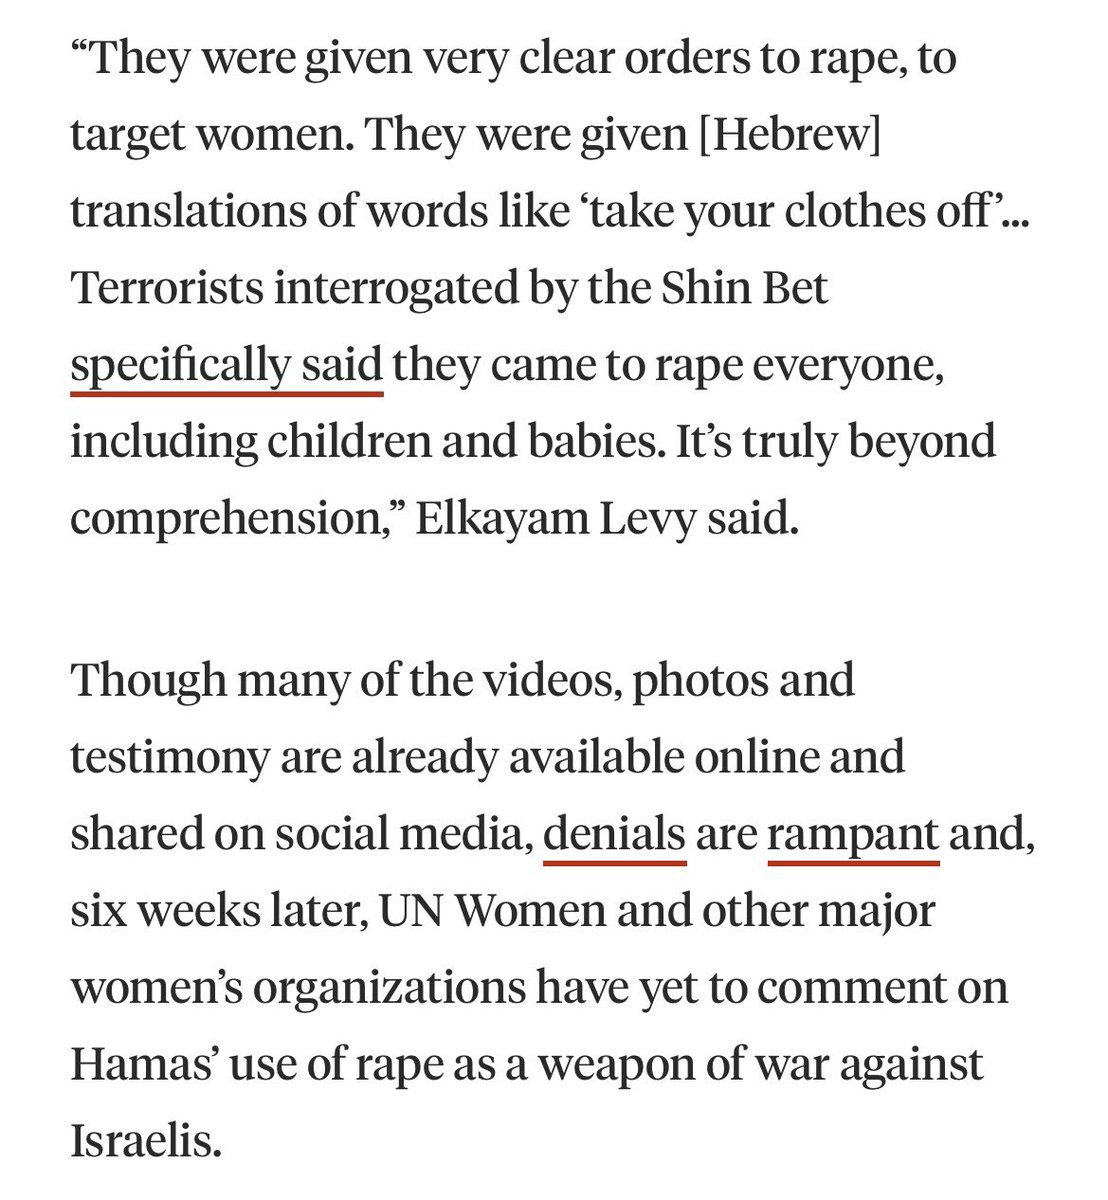 Today is International Day Against Gender-based Violence, and *finally* on the 50th day since unspeakable rape and violence against women and girls (including babies), UN Women have made a comment. Shameful. jewishinsider.com/2023/11/israel…